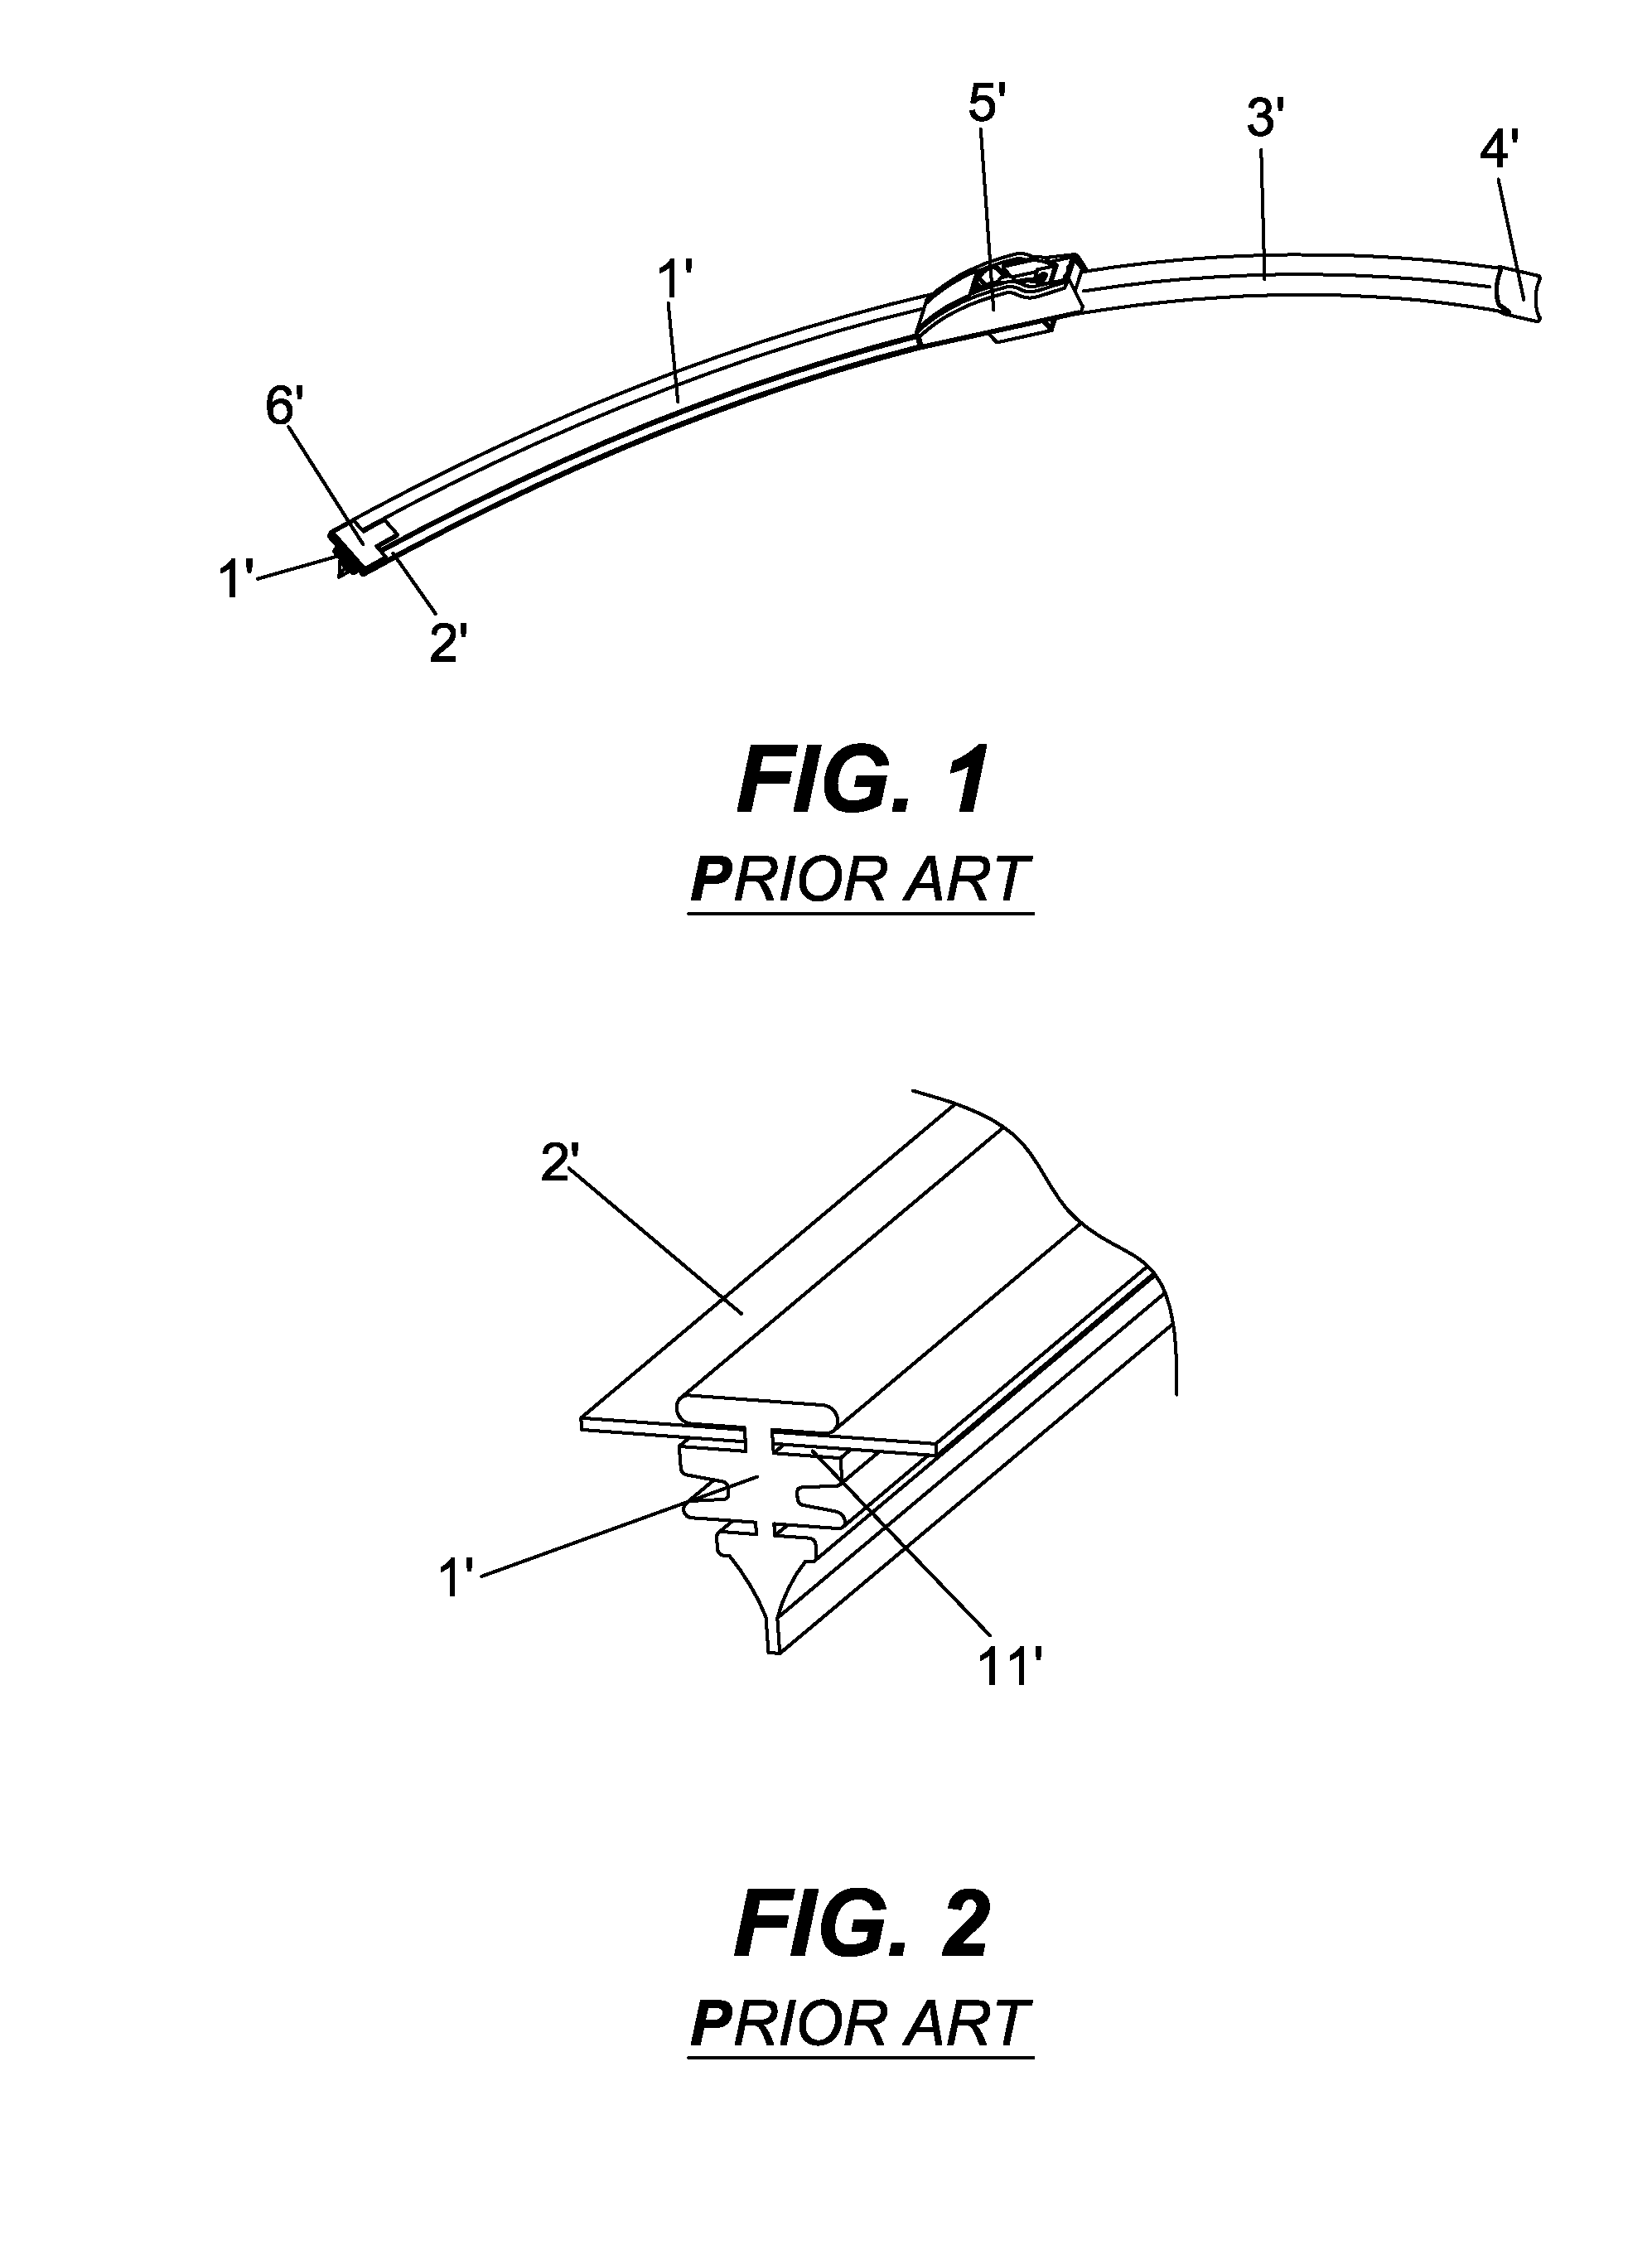 Connecting structure of a resilient support member and a strip of wiper rubber of a windshield wiper